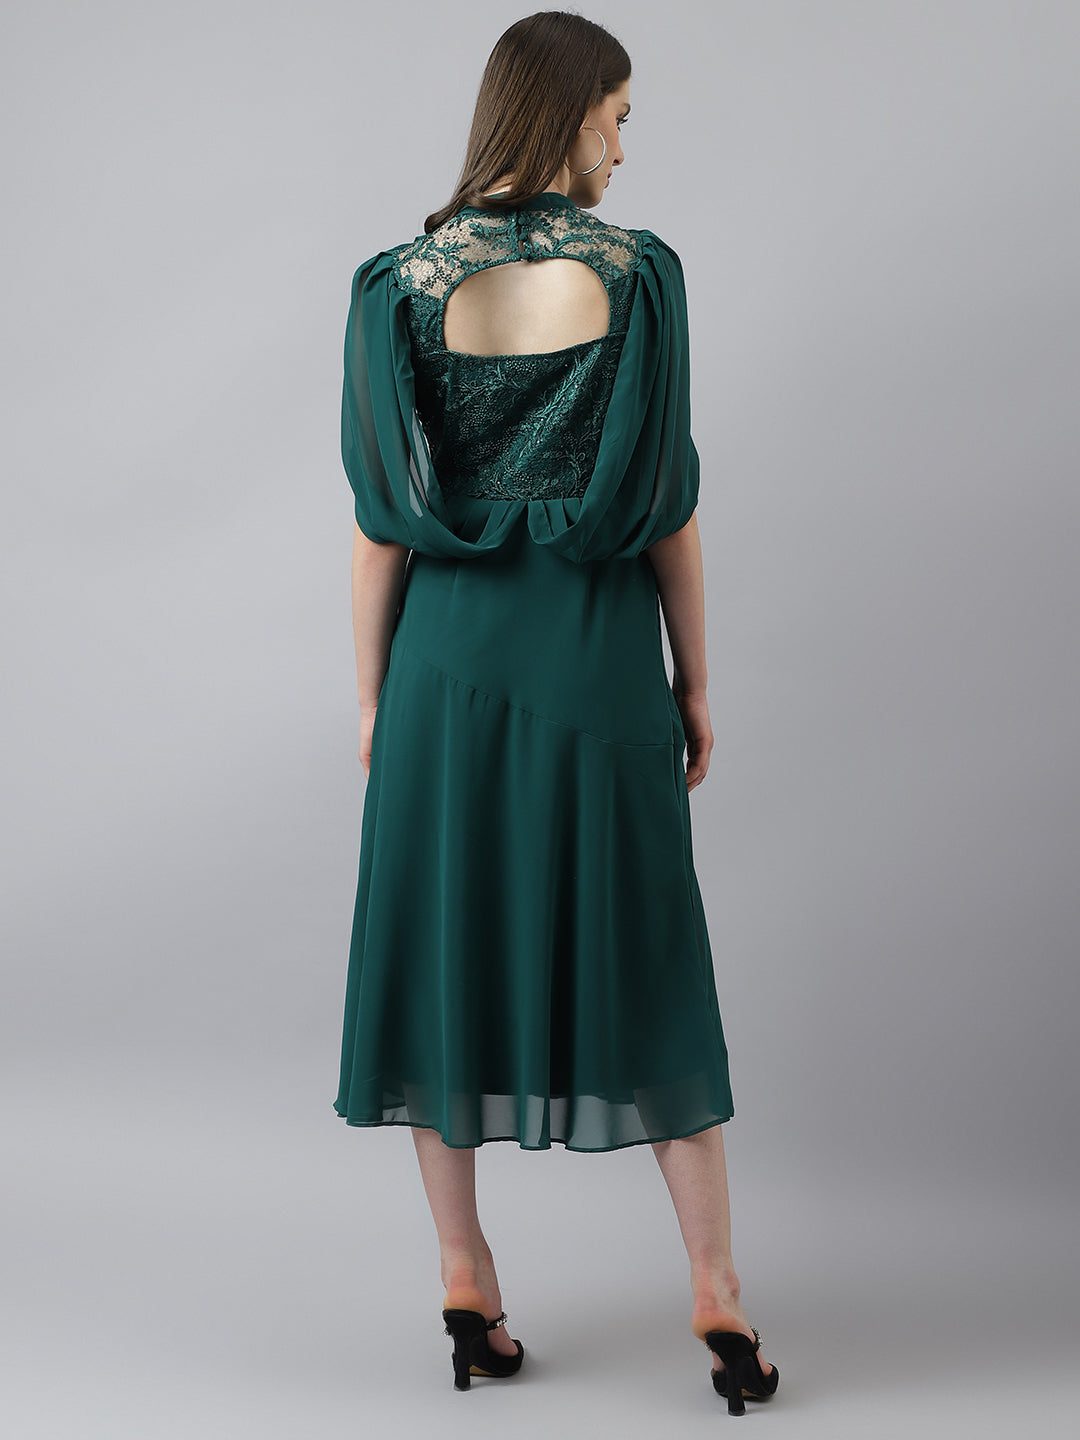 Greenbottle A-Line Lace Designer Dress With Cape Sleeves